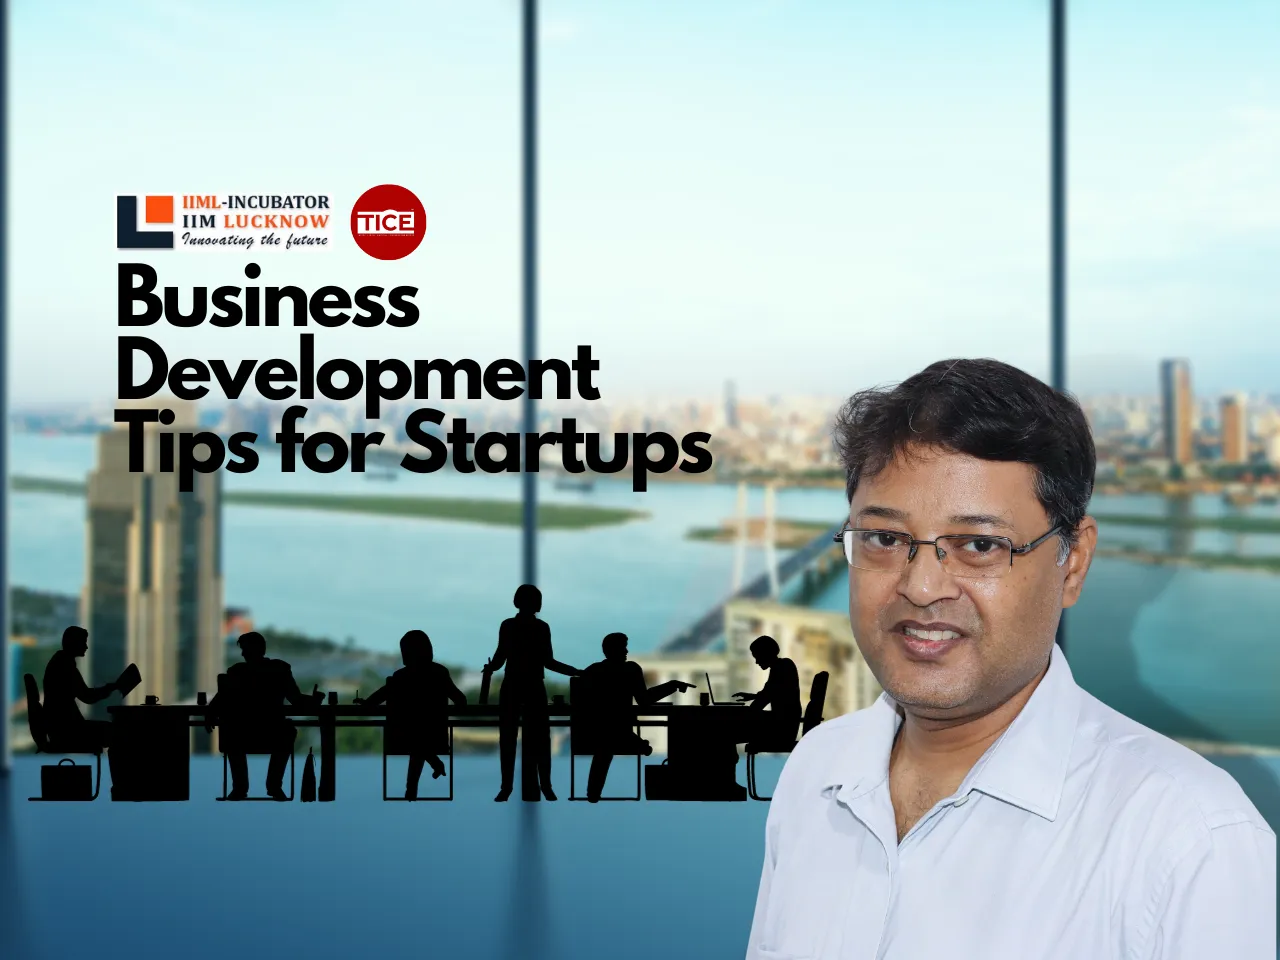 Why is Business Development Important for Startups?